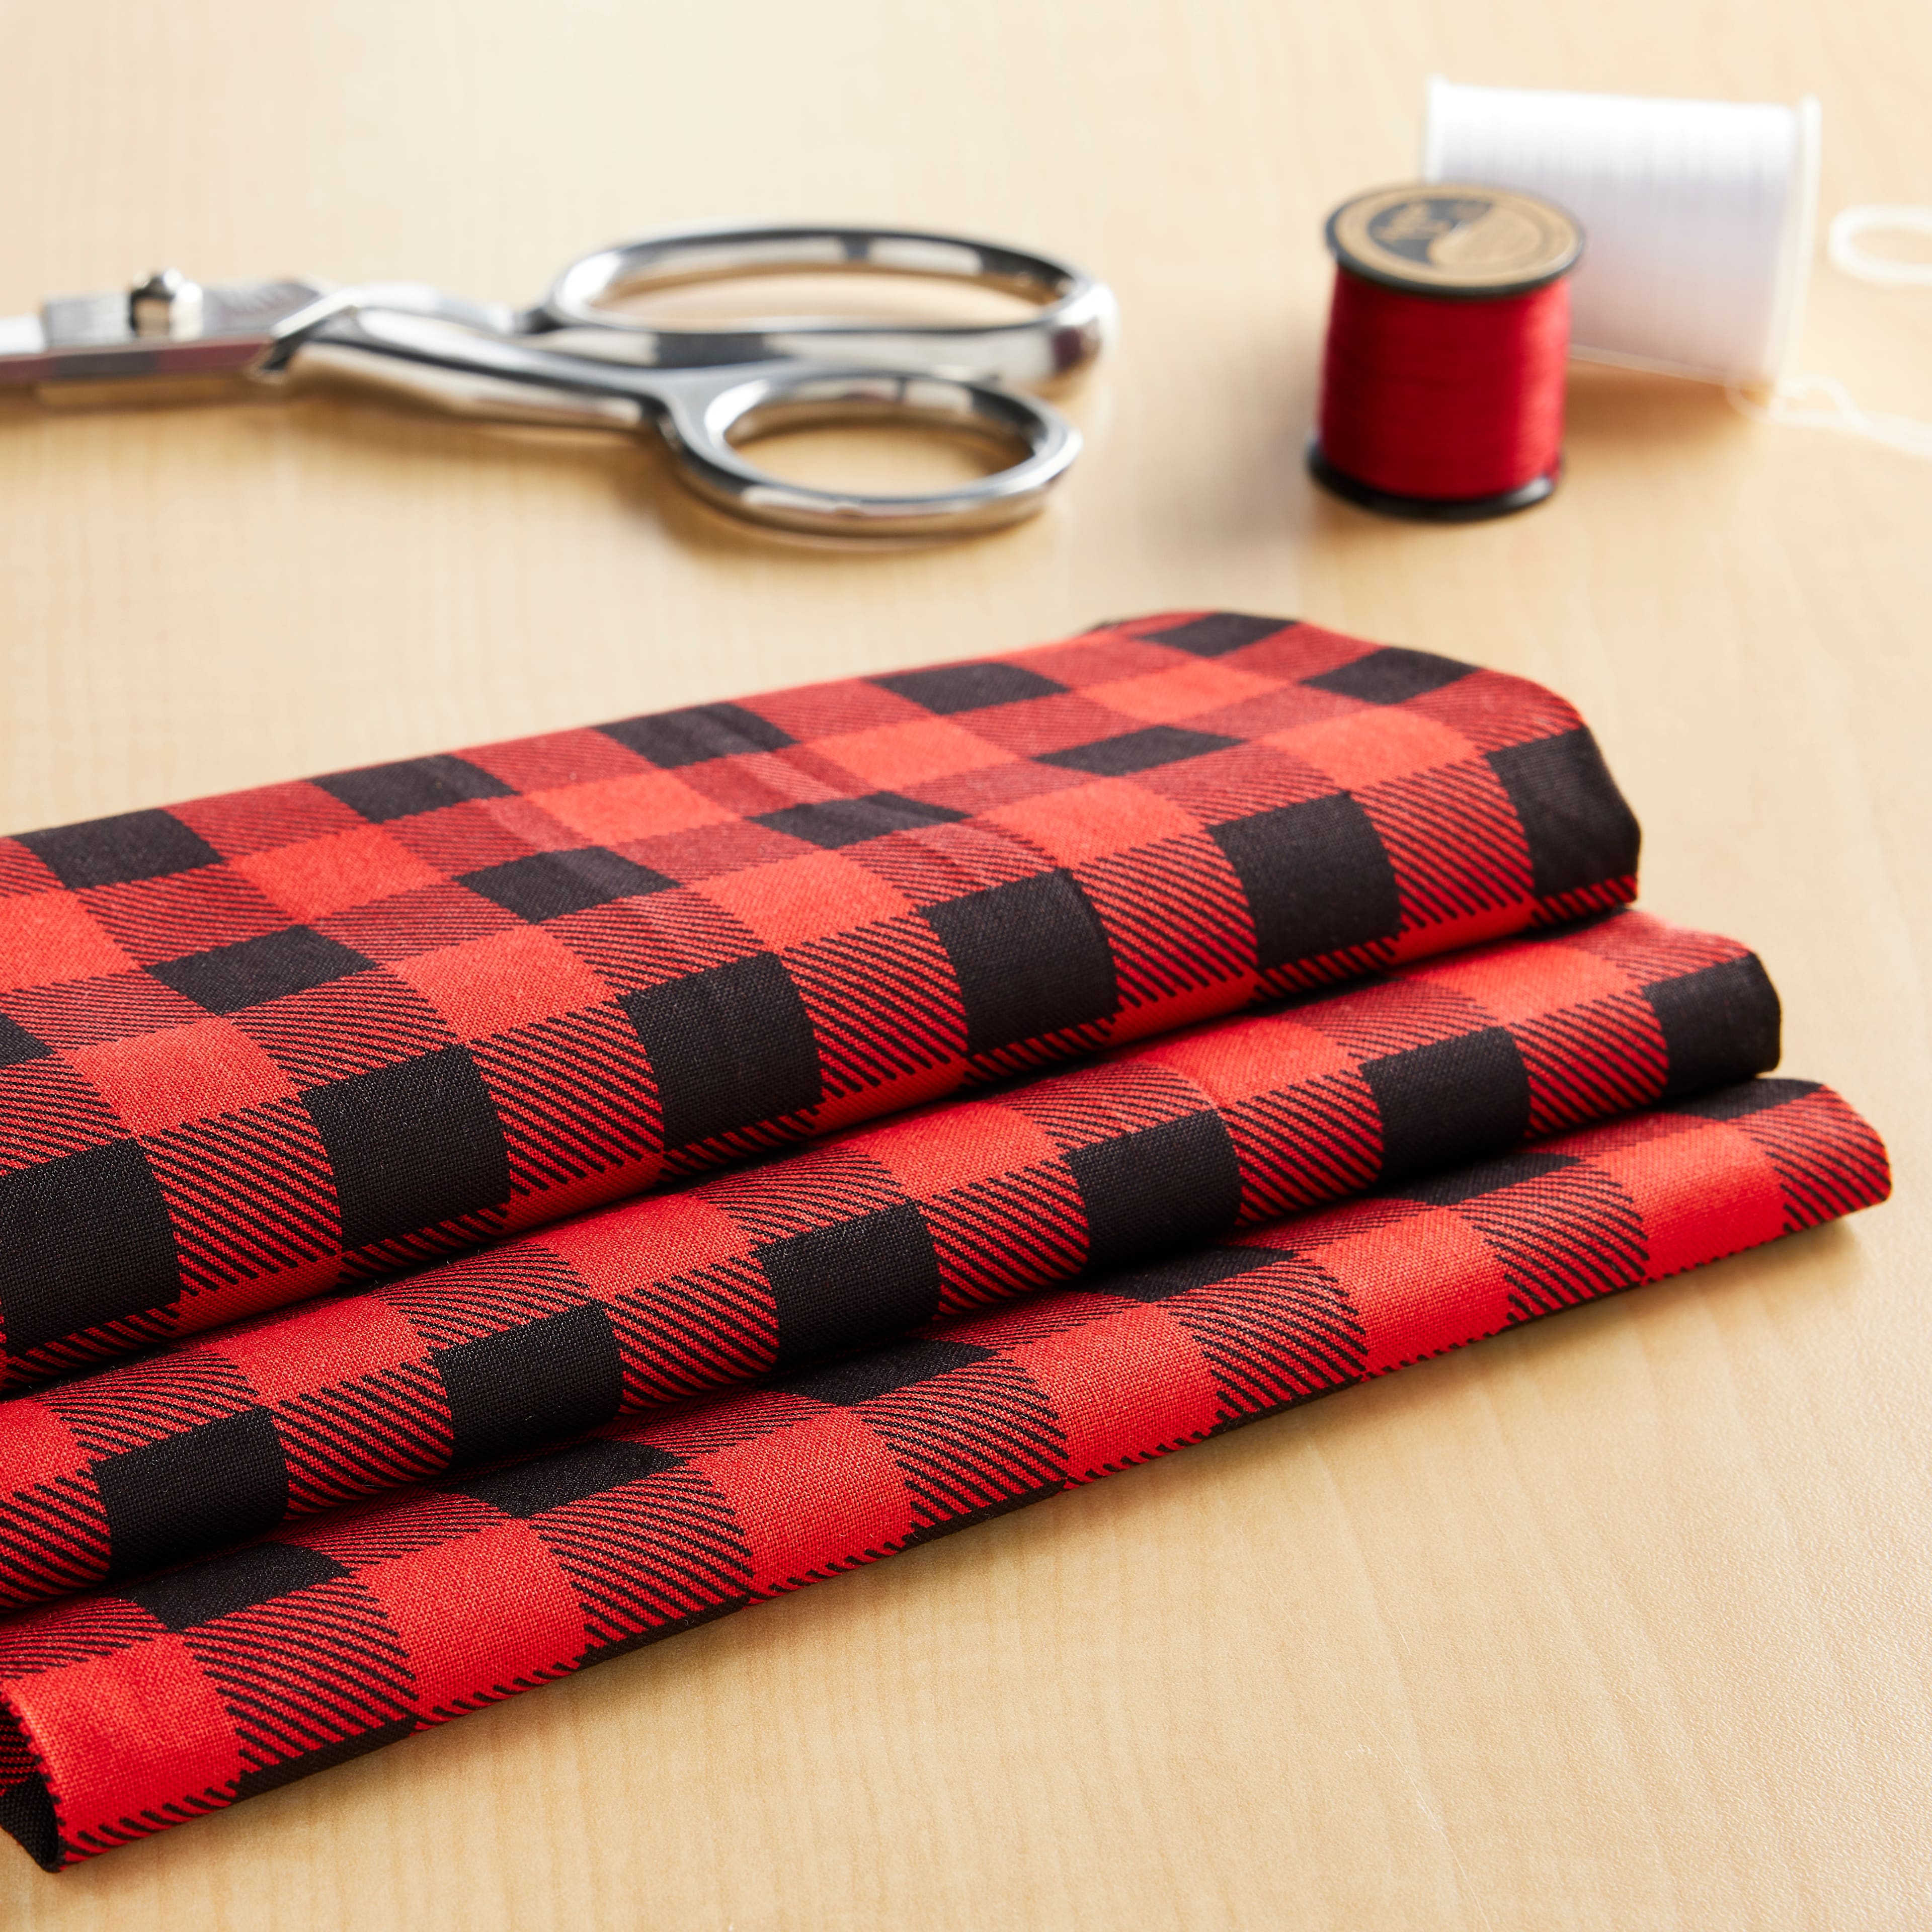 Buffalo Plaid Red and Black - Large Square Plaid Flannel 100% Cotton Fabric